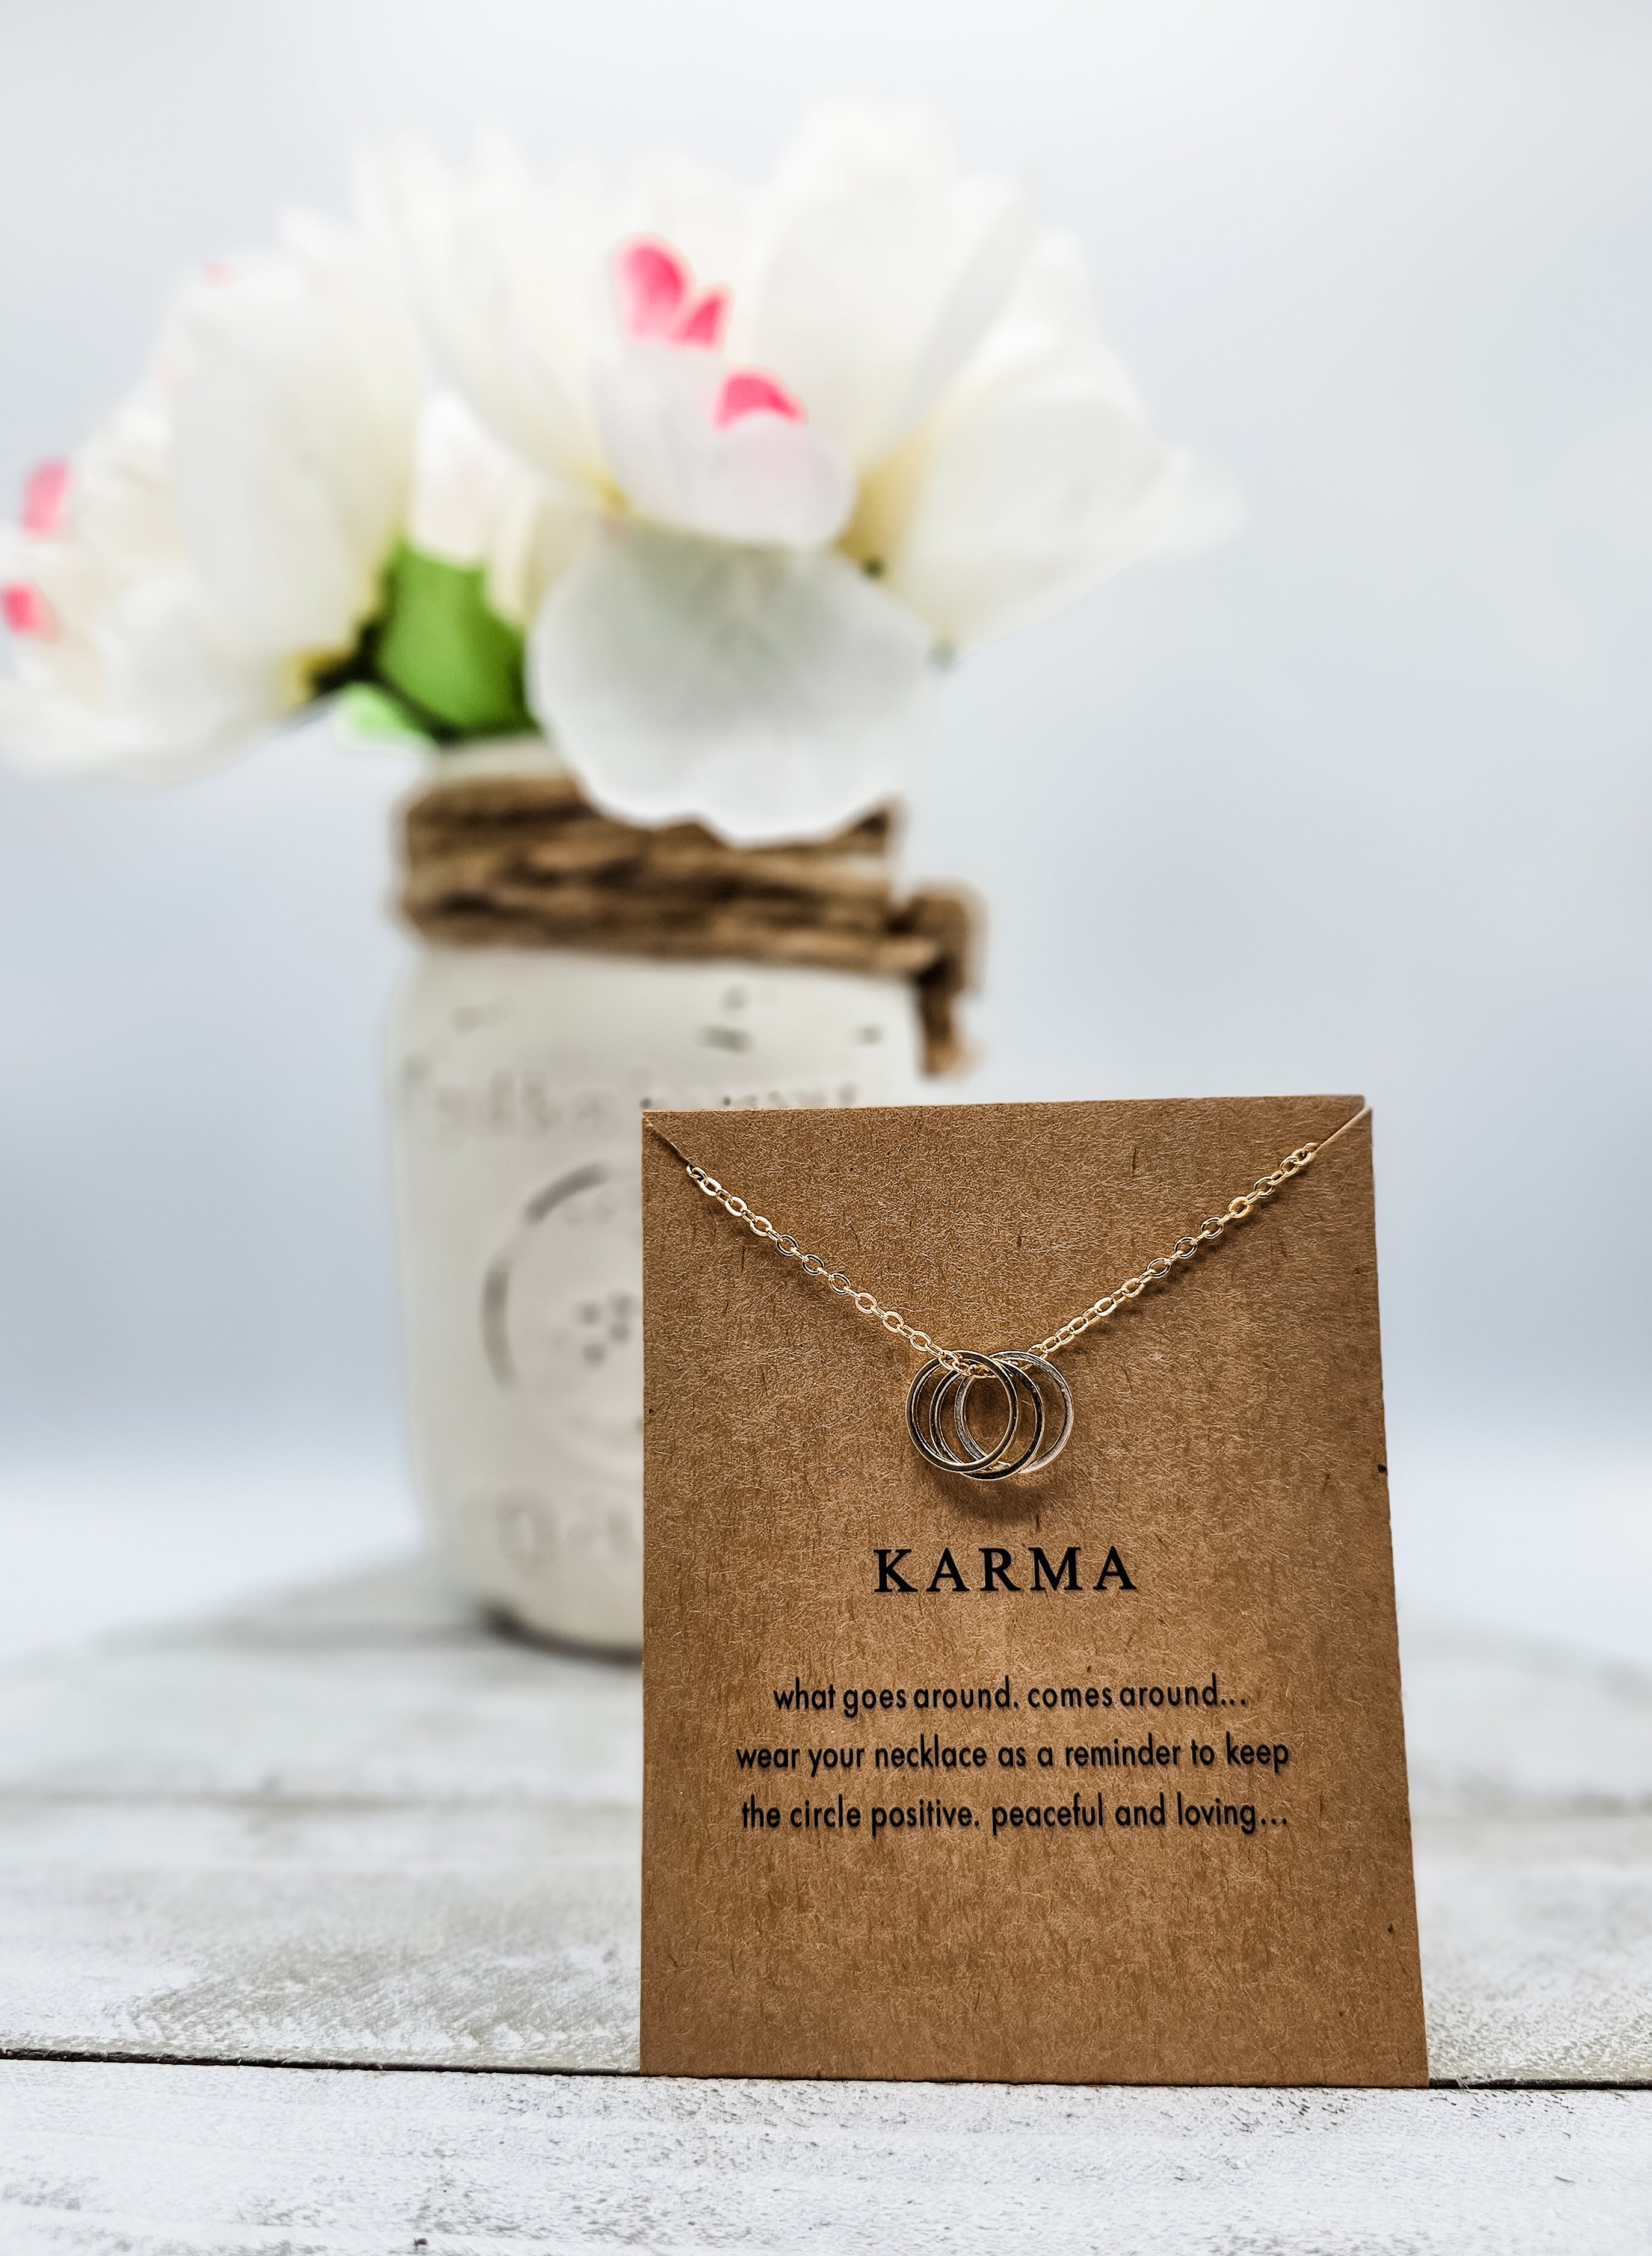 Karma - Inspirational and Meaningful Pendant Necklace